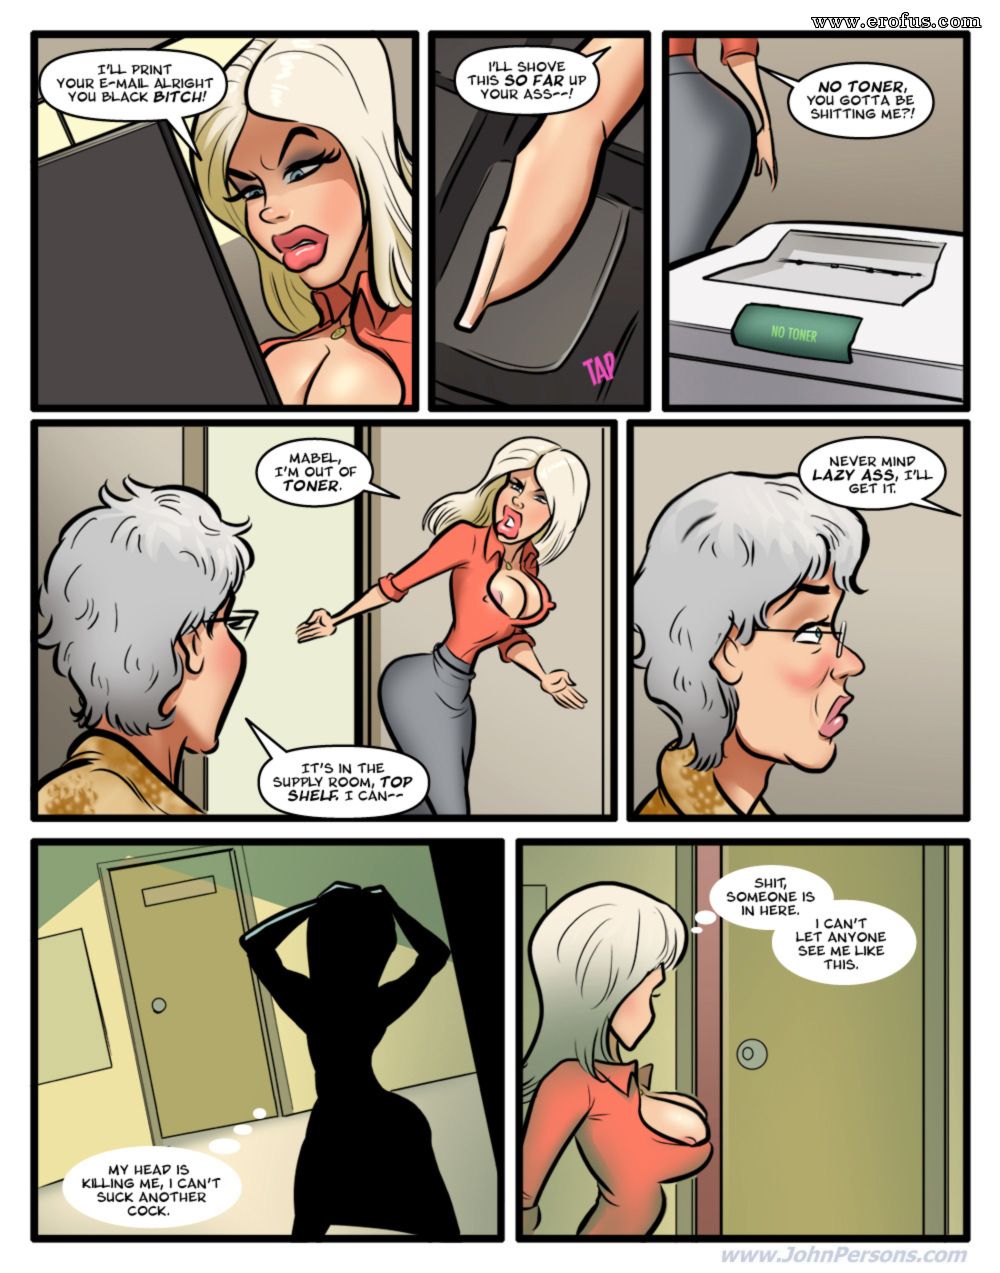 Supply Room - Page 13 | johnpersons_com-comics/moose/cursed-for-black-cock ...